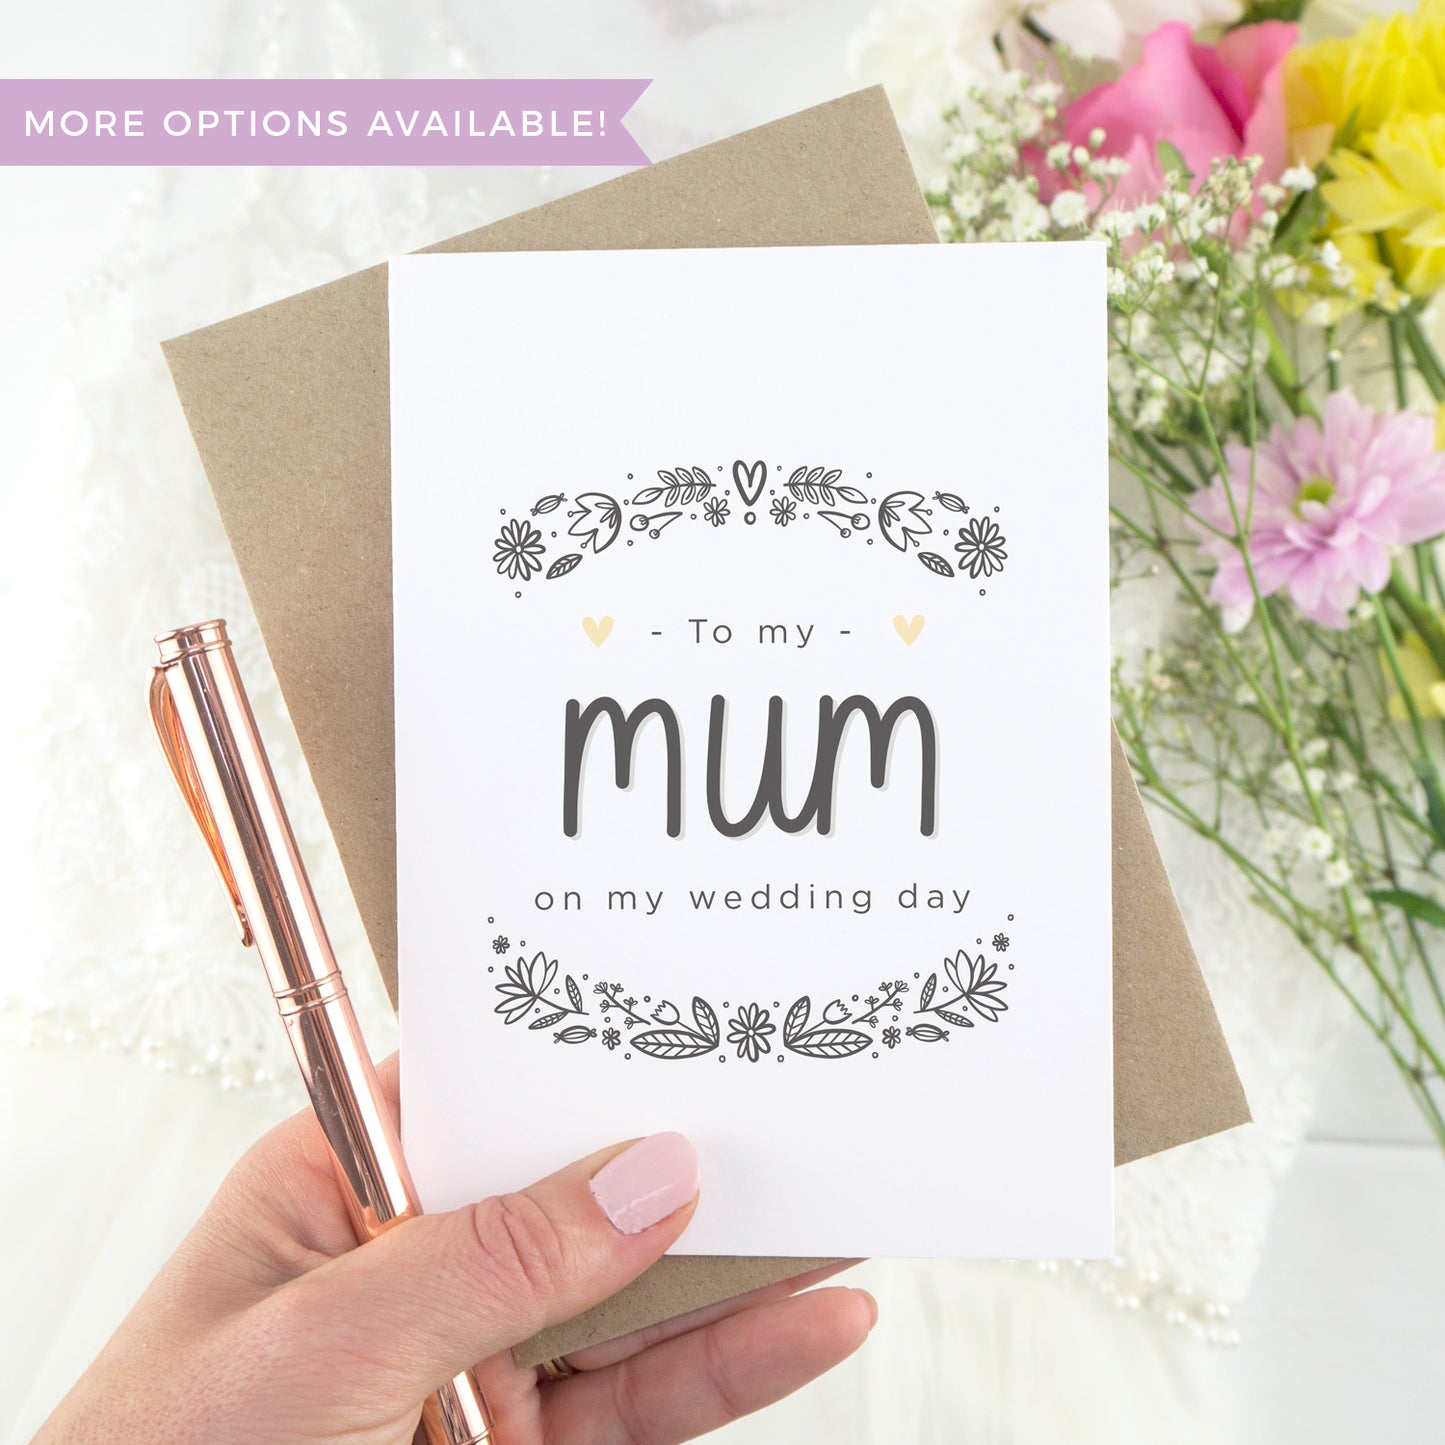 To my mum on my wedding day. A white card with grey hand drawn lettering, and a grey floral border. The image features a wedding dress and bouquet of flowers.